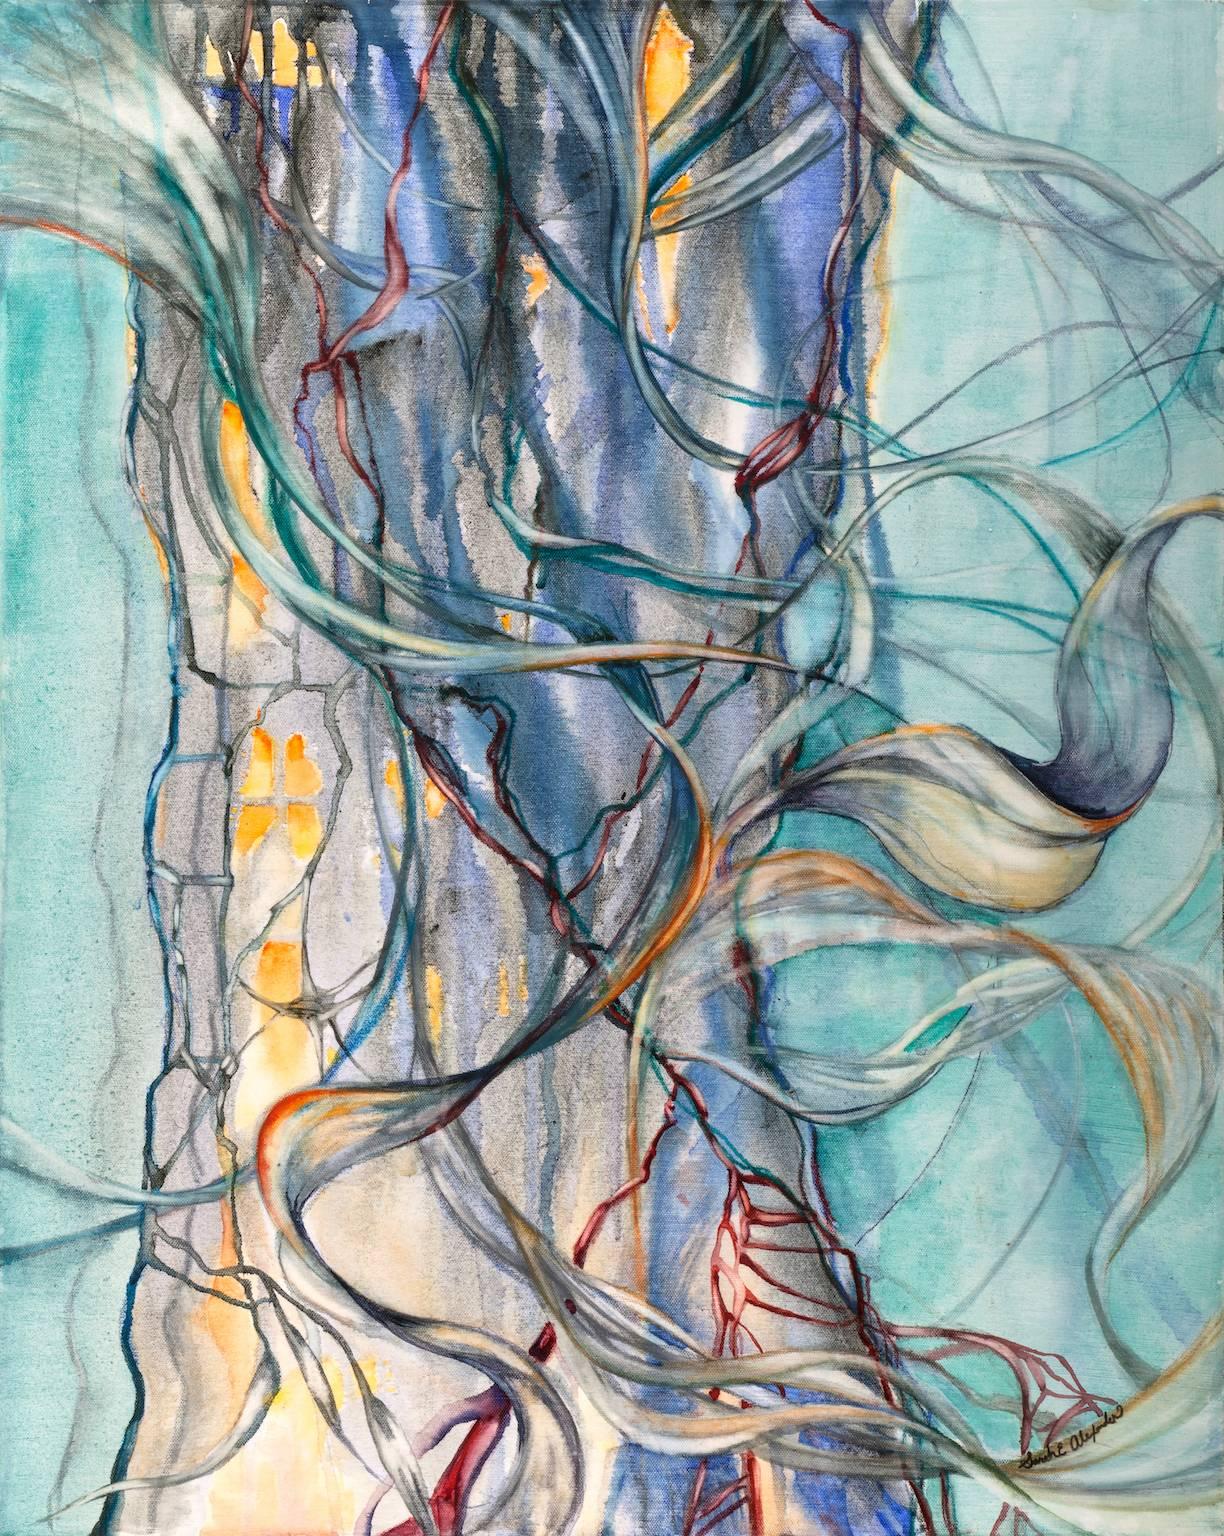 Sarah Alexander Abstract Painting - "Ebb and Flow", abstract, surreal, turquoises, blues, watercolor painting